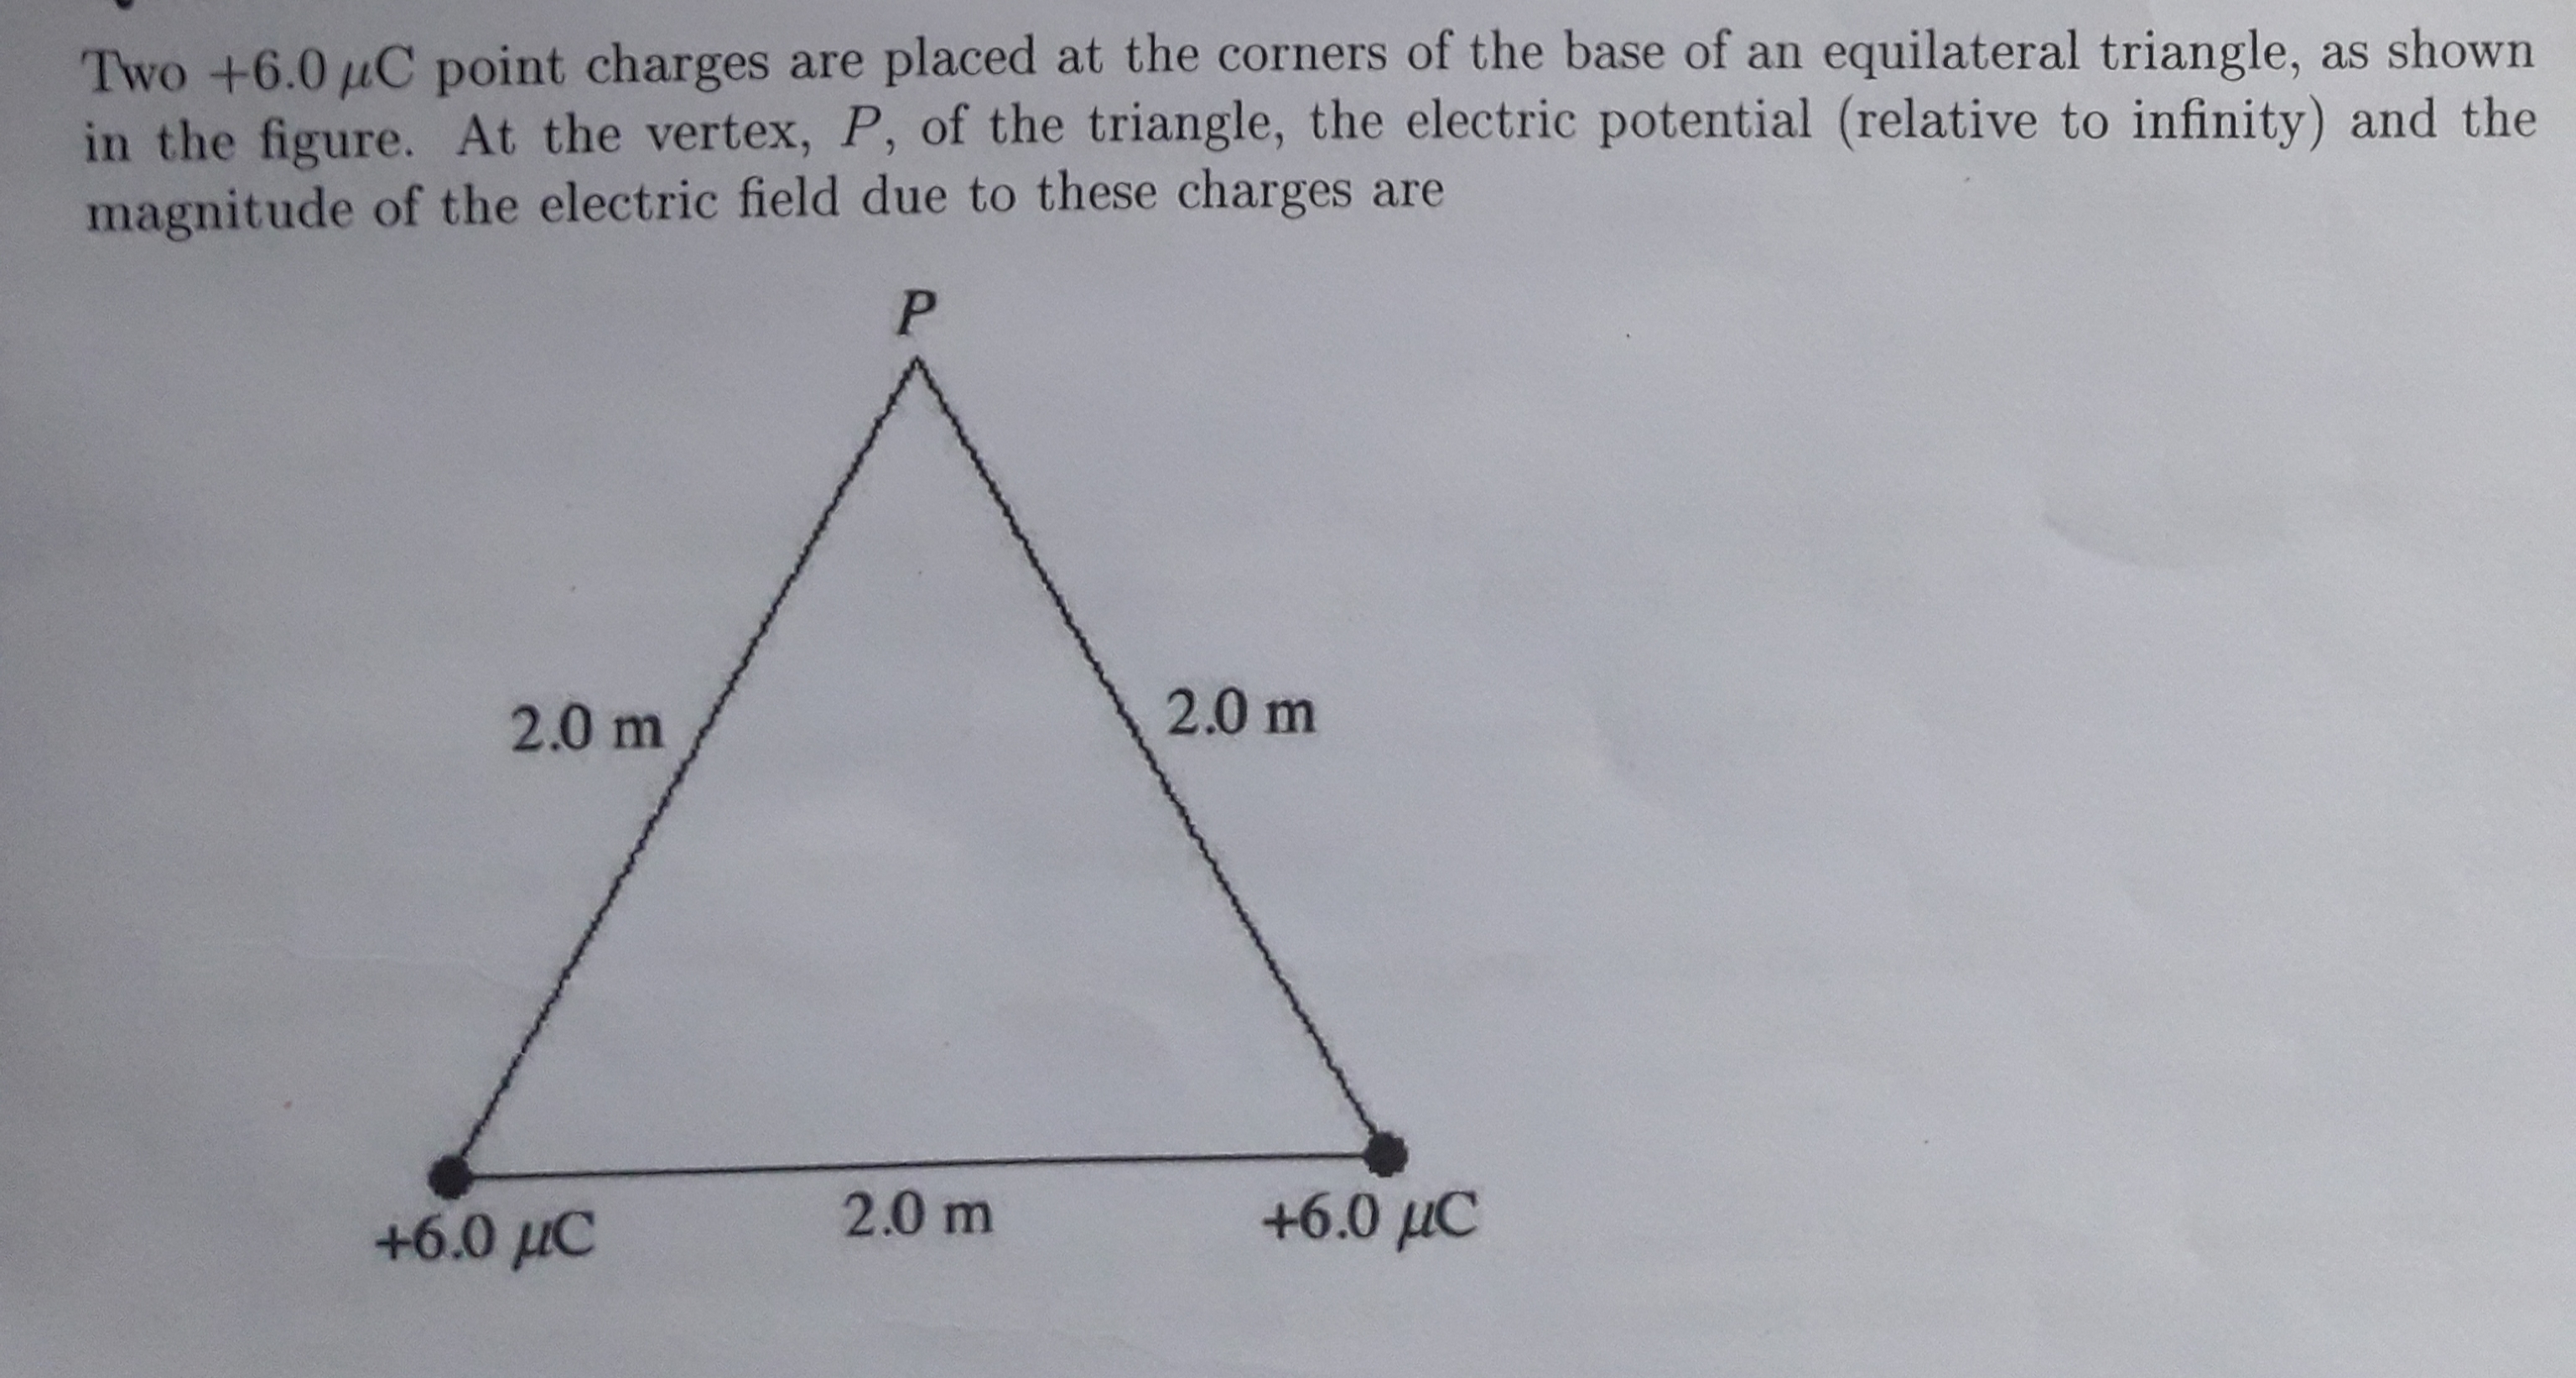 Two +6.0 µC point charges are placed at the corners of the base of an equilateral triangle, as shown
in the figure. At the vertex, P, of the triangle, the electric potential (relative to infinity) and the
magnitude of the electric field due to these charges are
2.0 m
2.0 m
+6.0 µC
2.0 m
+6.0 µC
